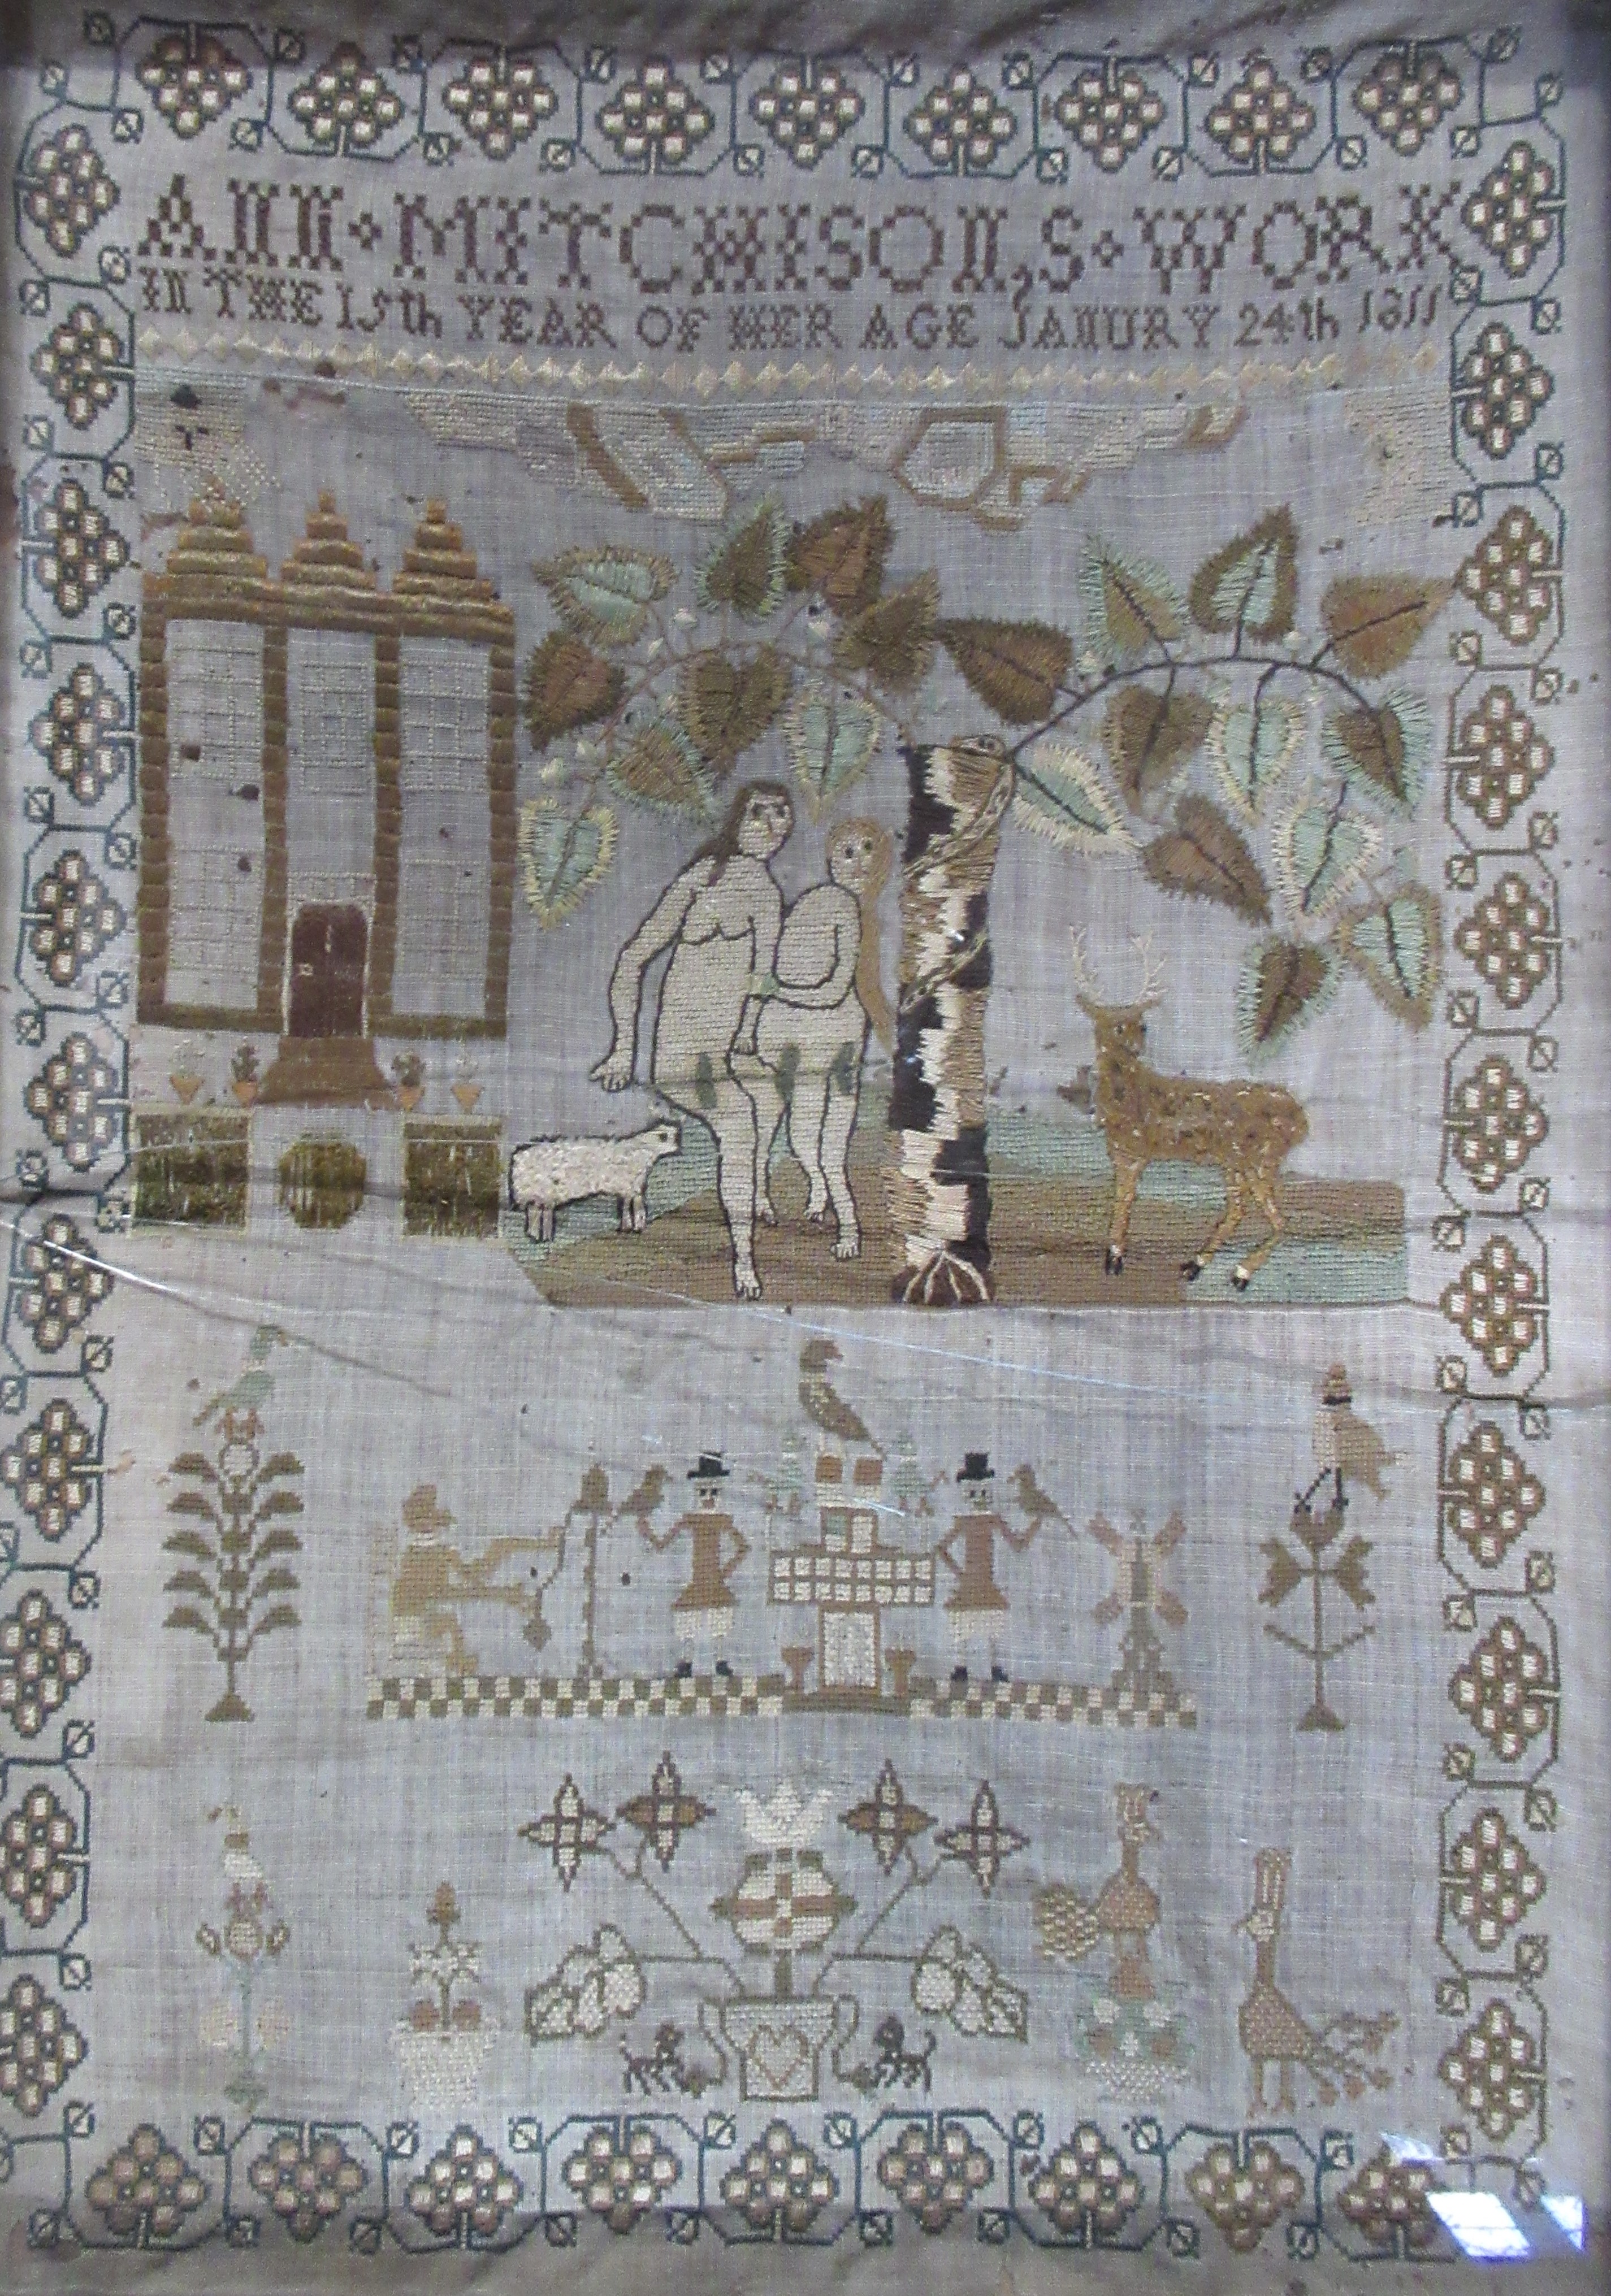 A 19th century tapestry sampler, Ann Mitchison, age 15, depicting Adam and Eve, January 24th 1811, - Bild 2 aus 3